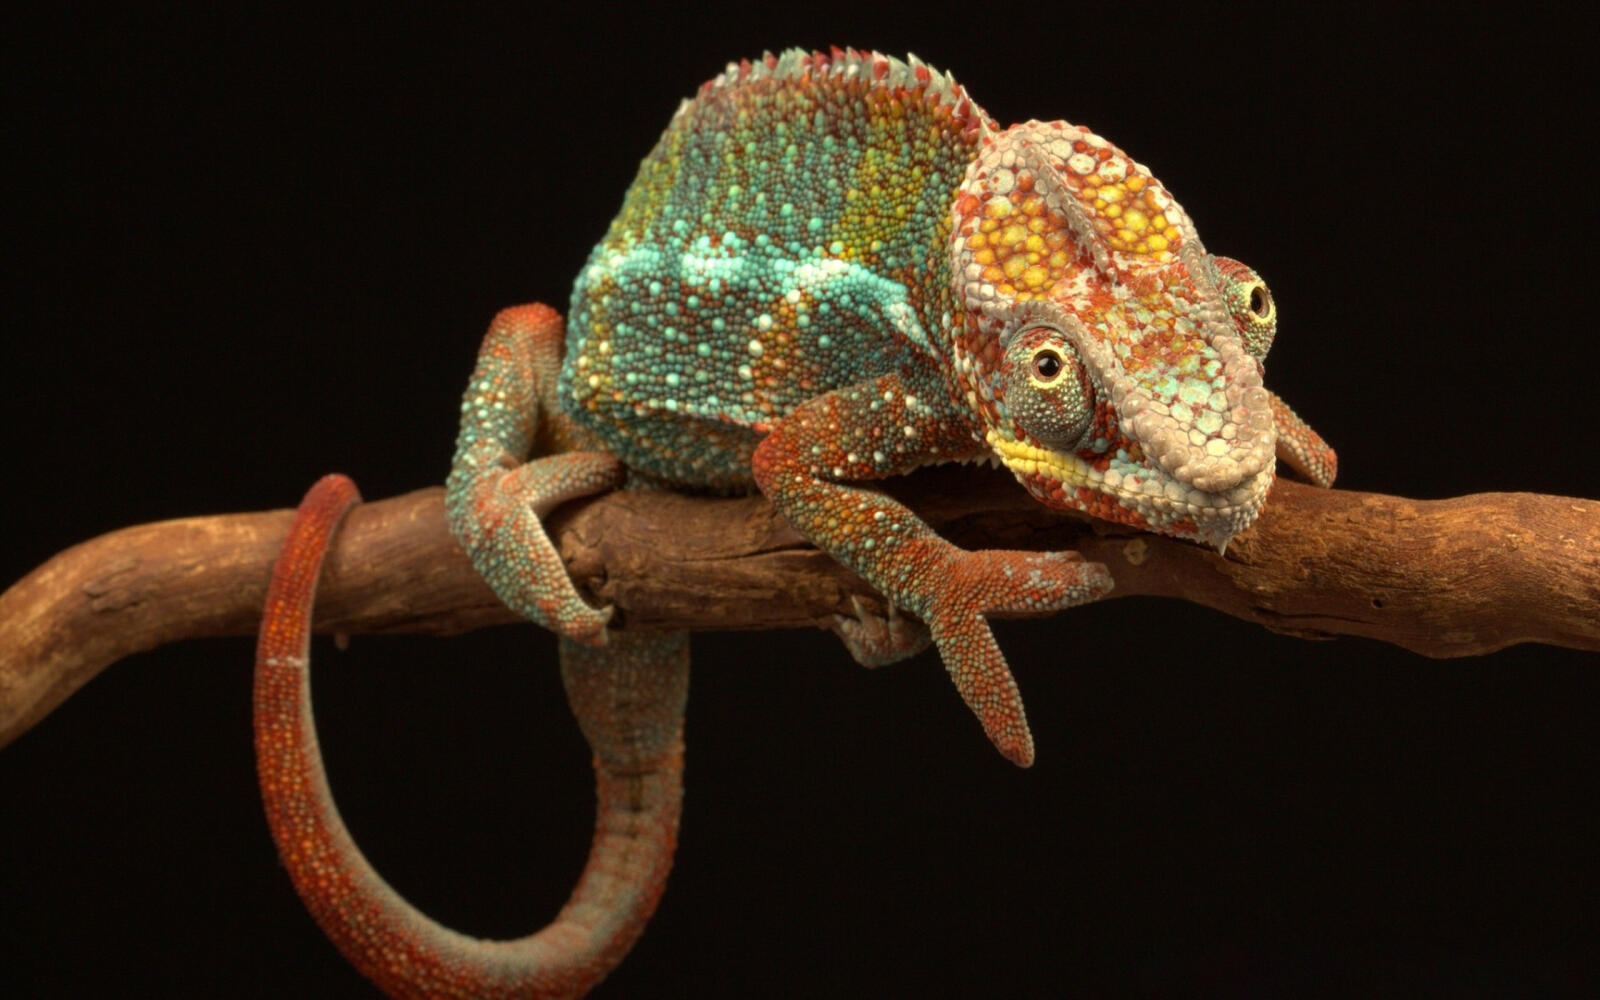 Free photo A chameleon clinging to a branch.